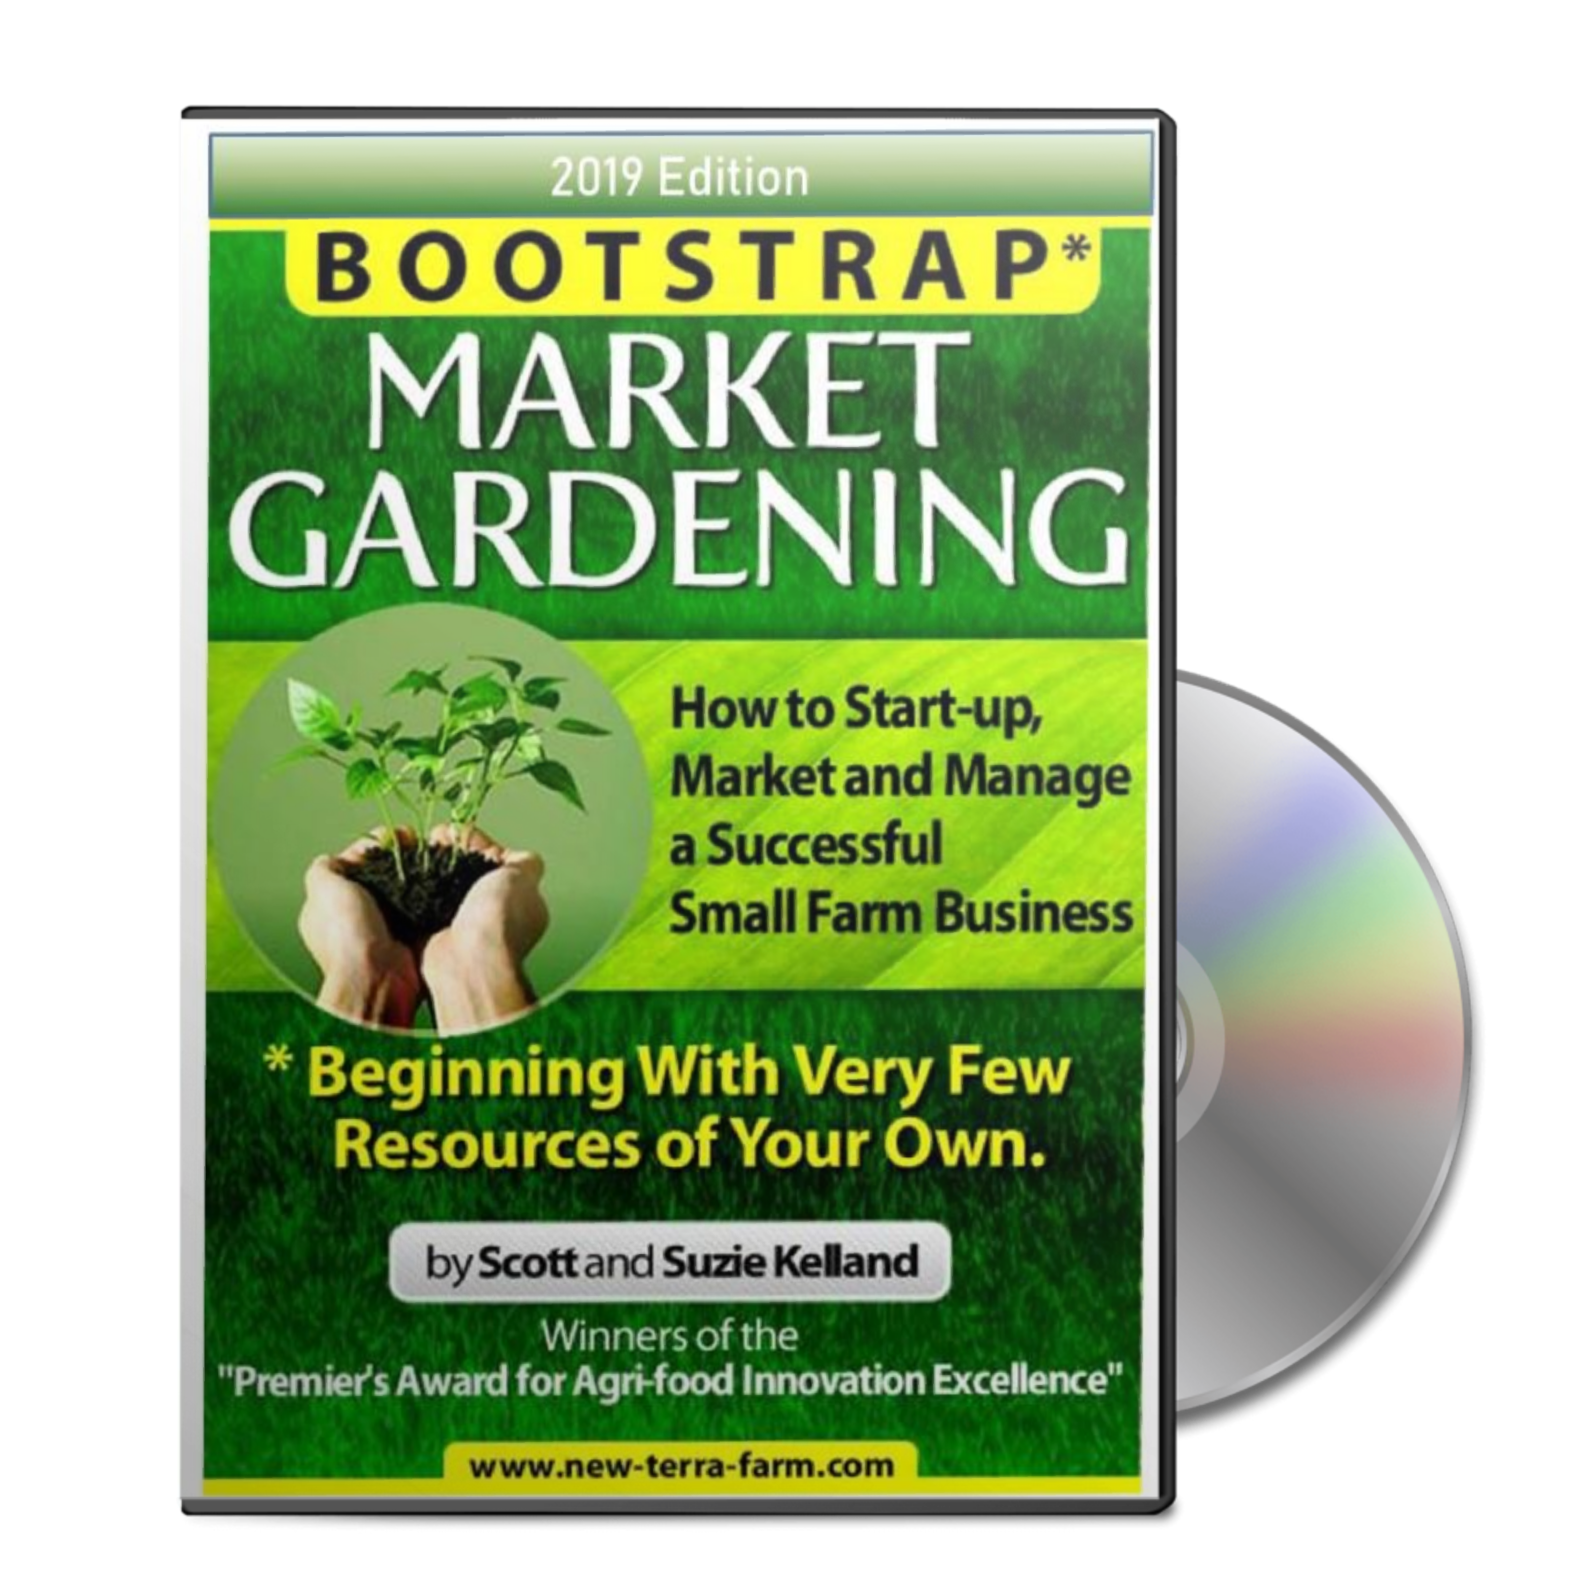 Market gardening needs good marketing as well as good gardening. Get free market gardening publicity with these ideas from New Terra Farm for 